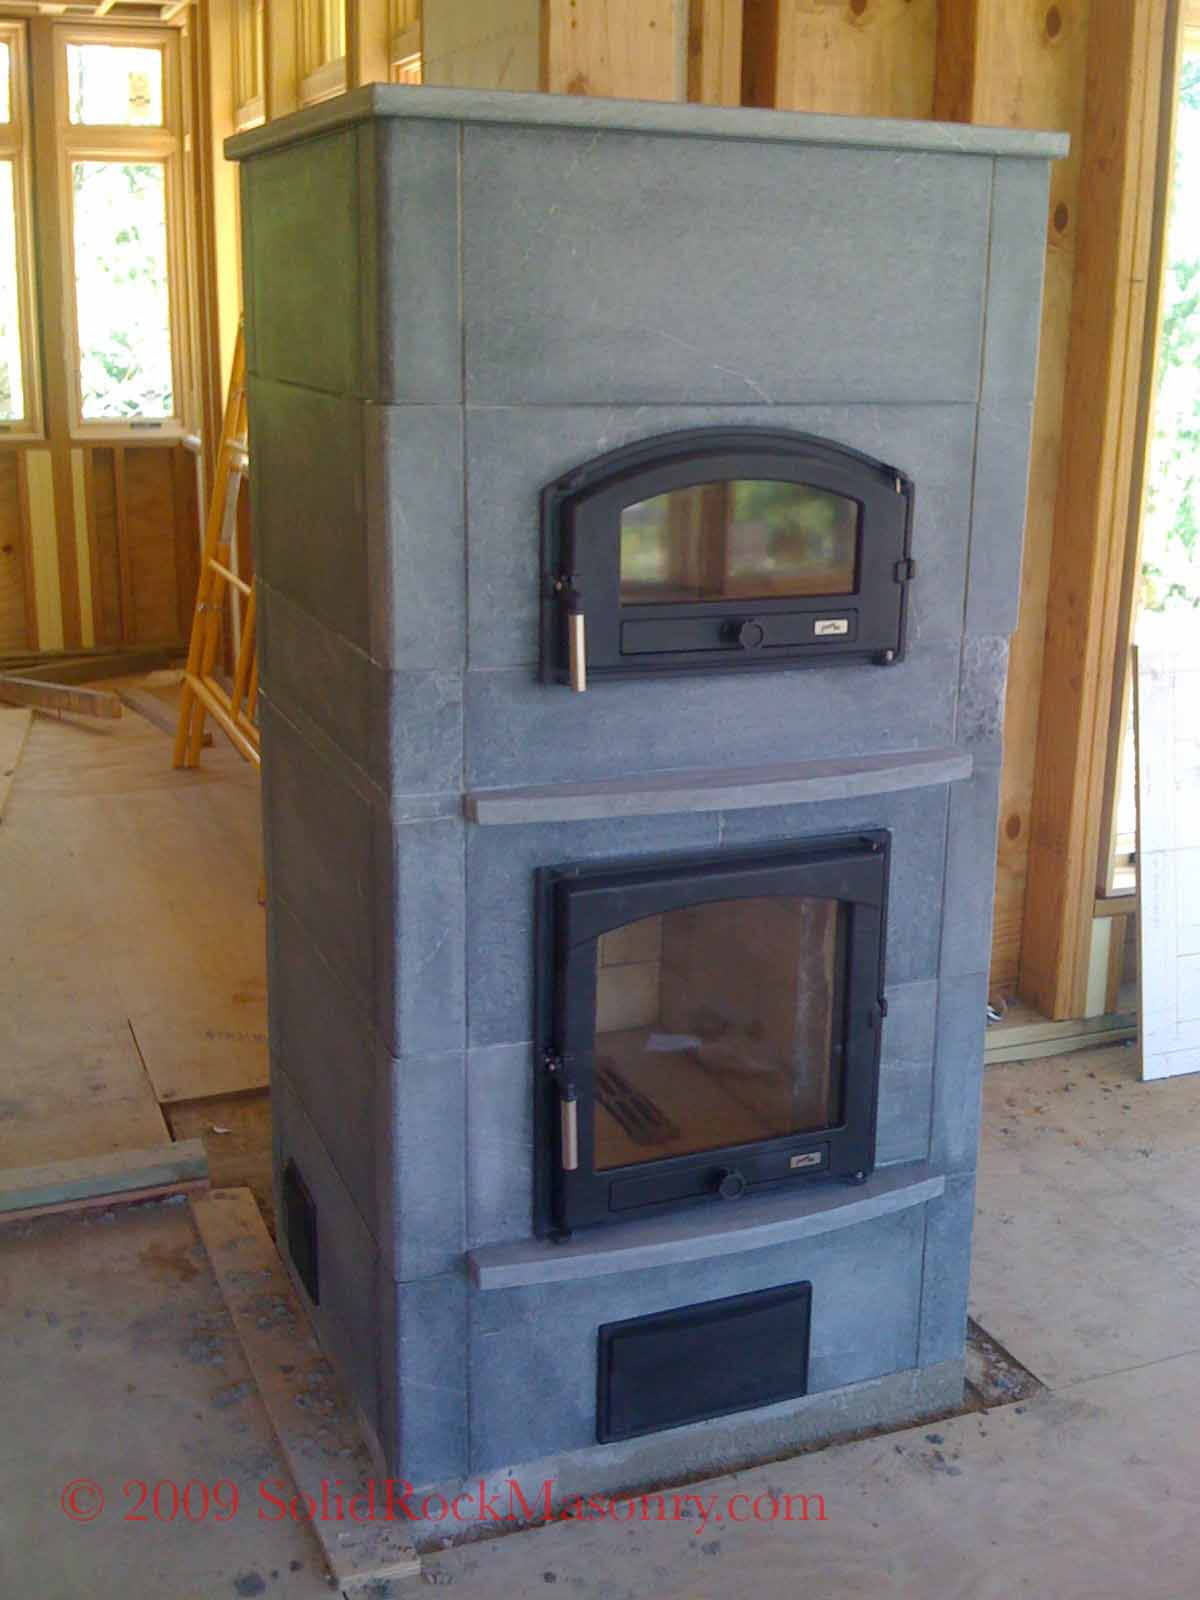 Contraflow Masonry Heater with bakeoven